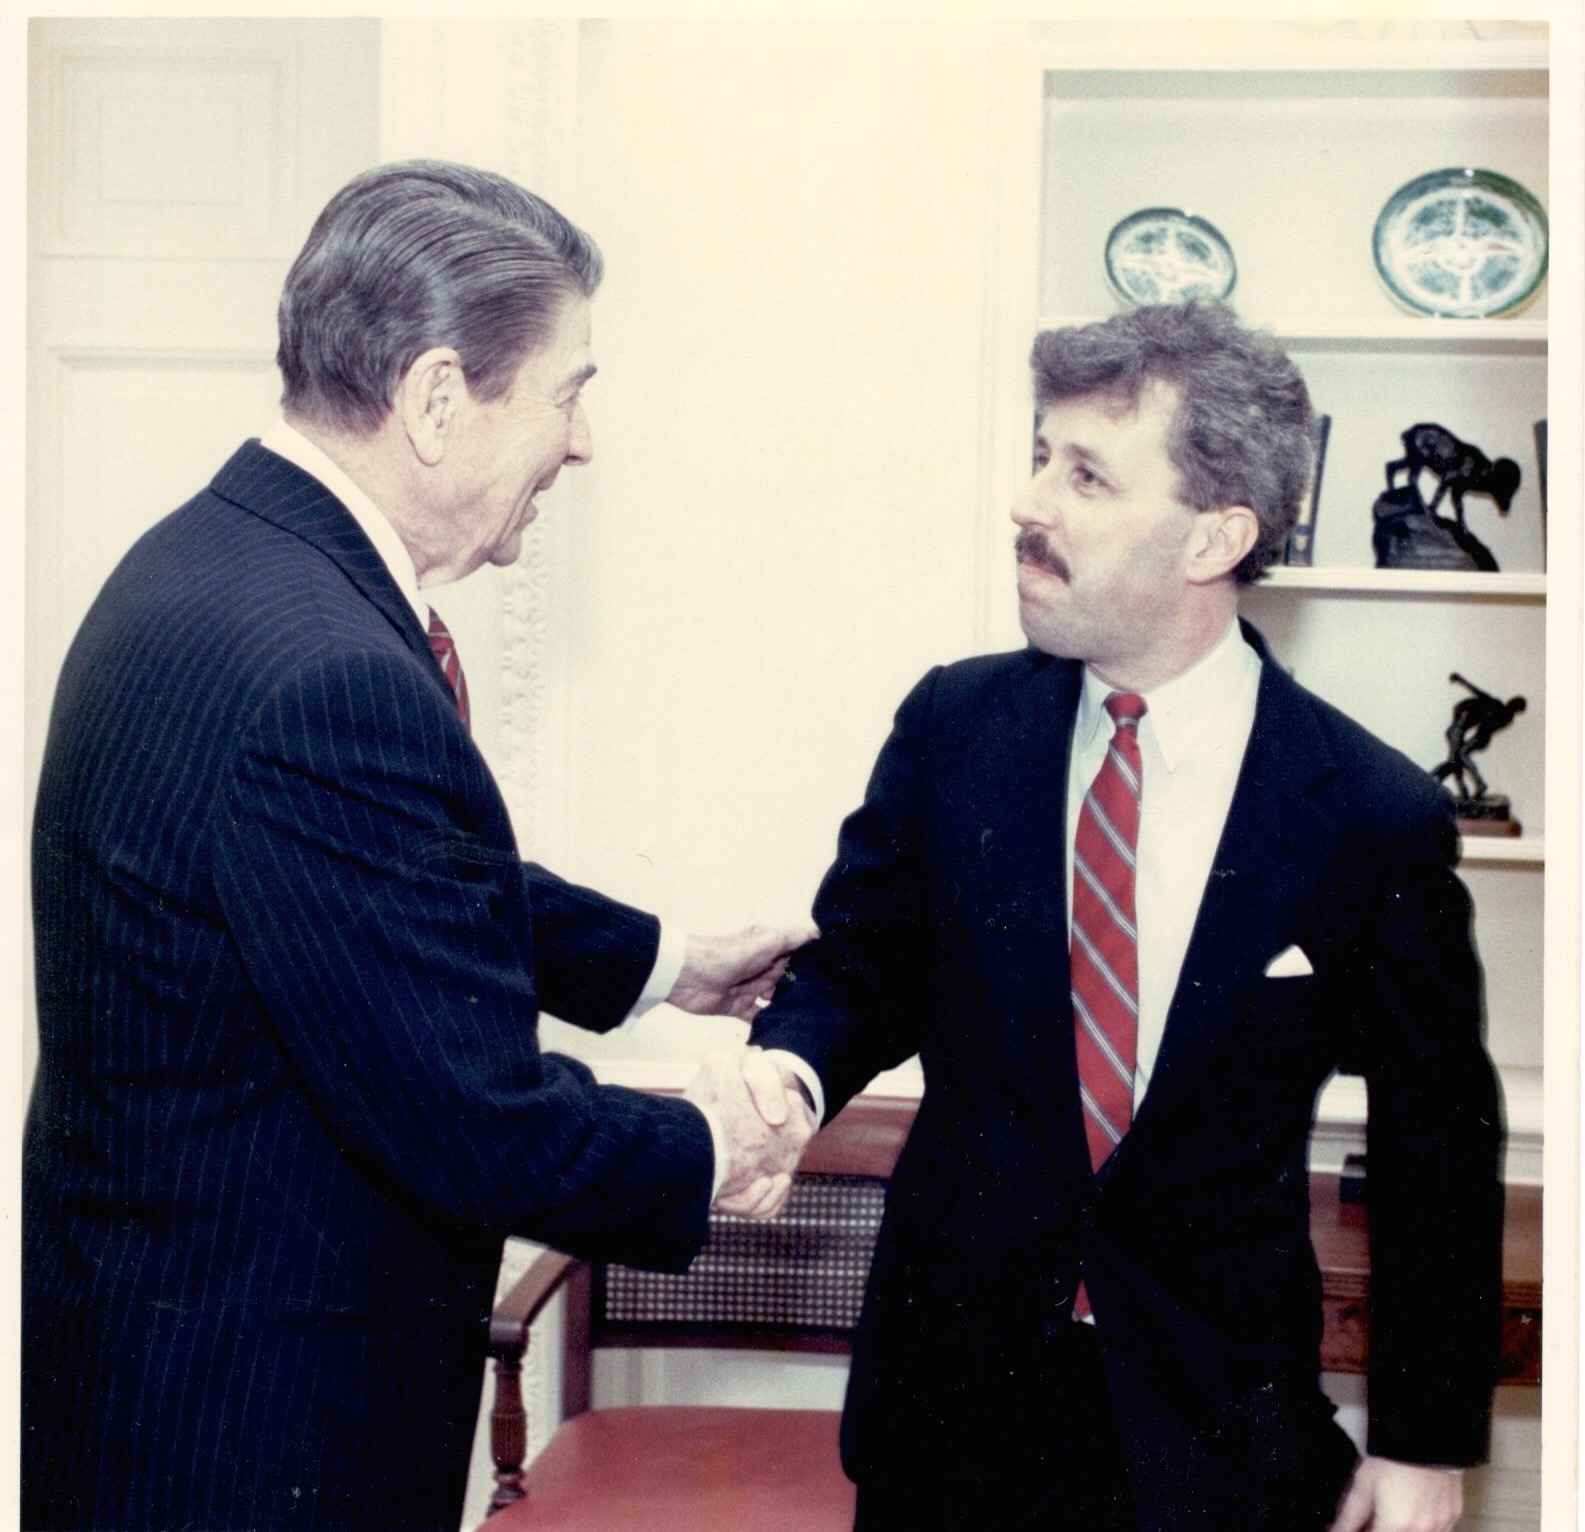 Pictured above: Jeffrey Lord with his former boss, President Ronald Reagan.